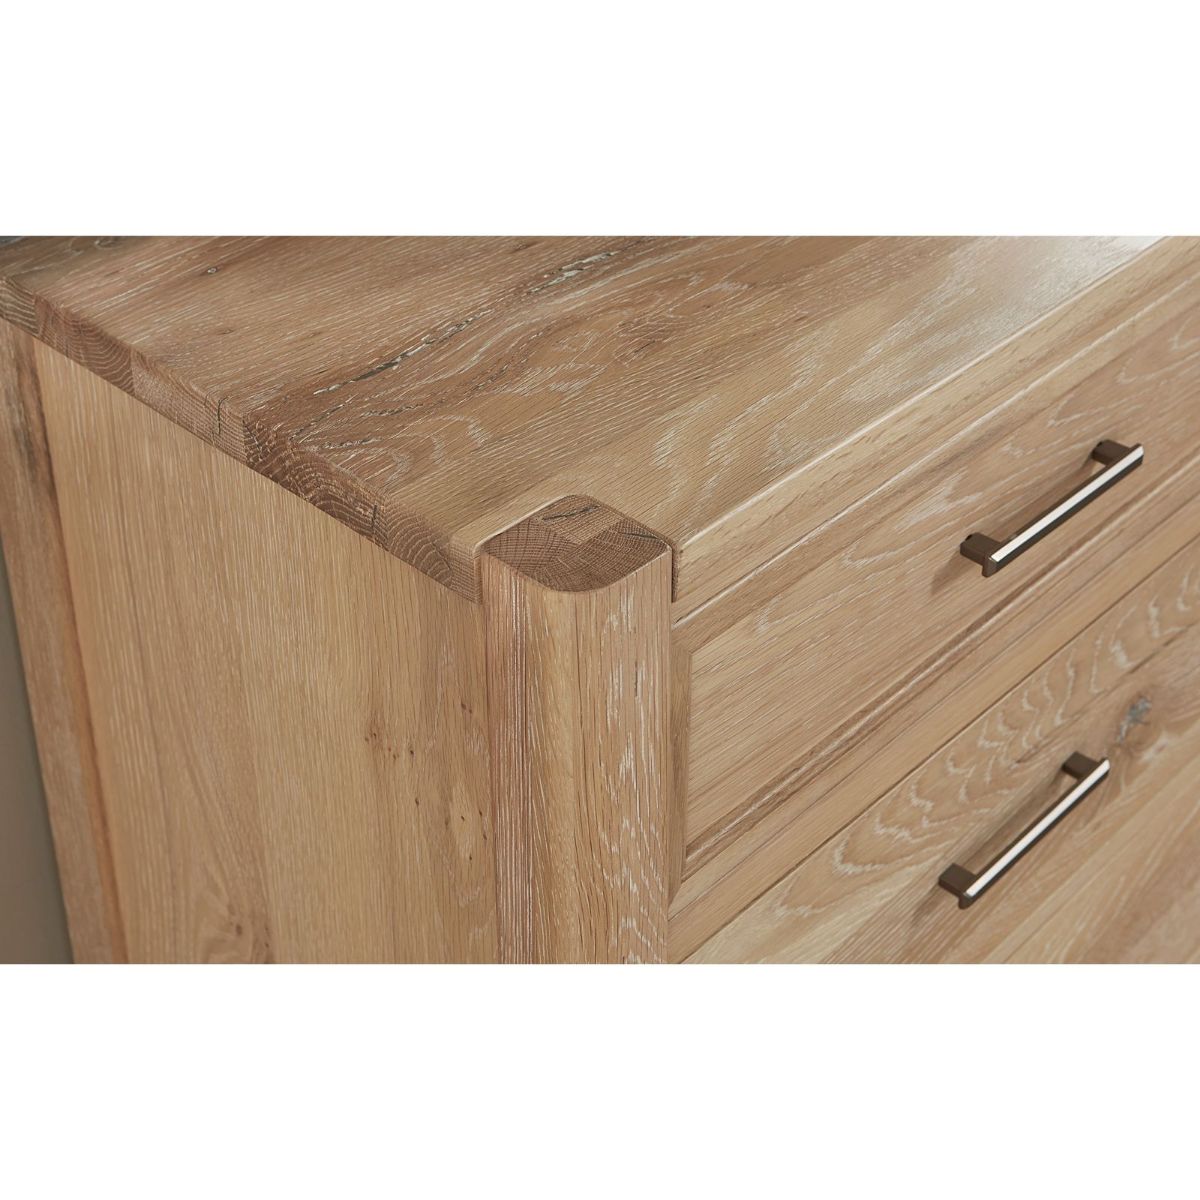 Picture of Crafted Oak Dresser